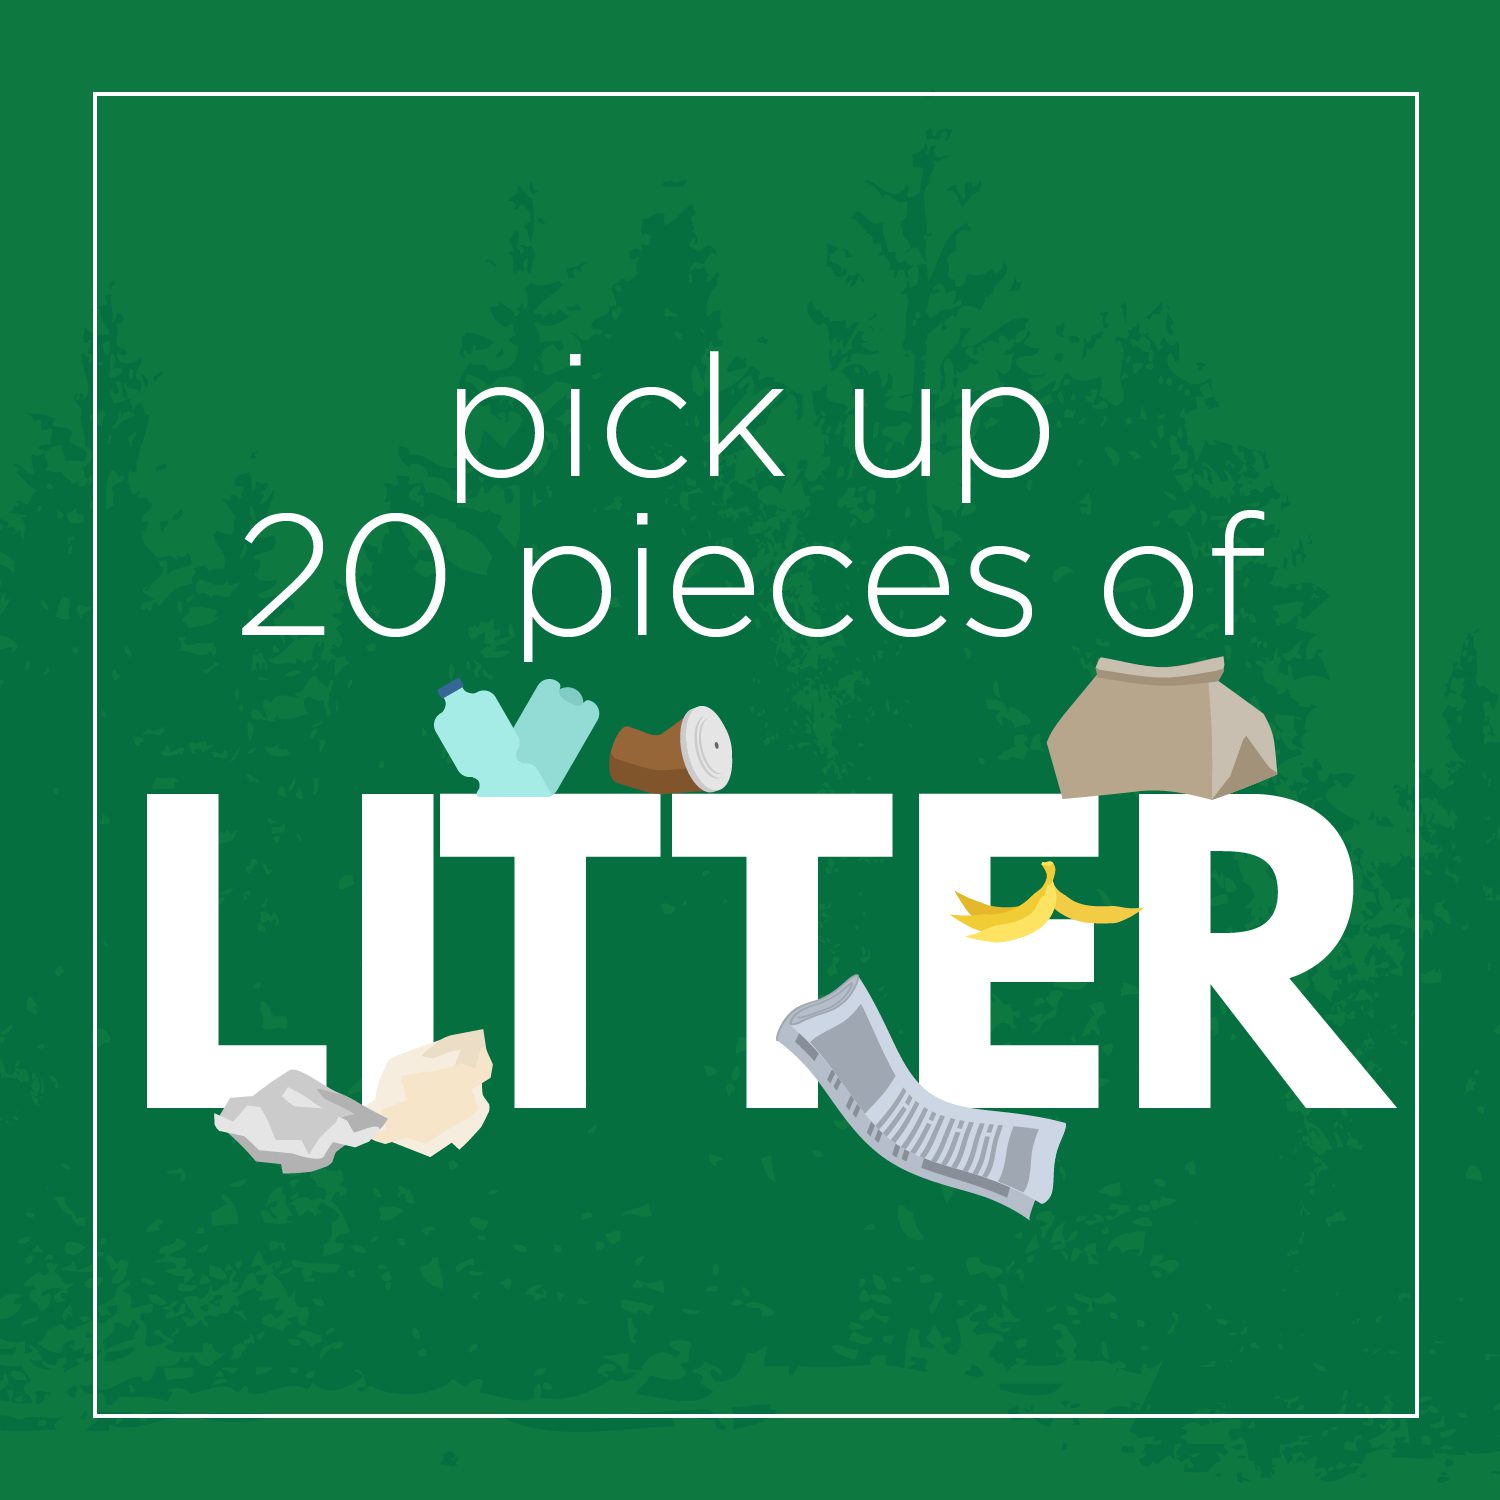 Pick up 20 pieces of litter